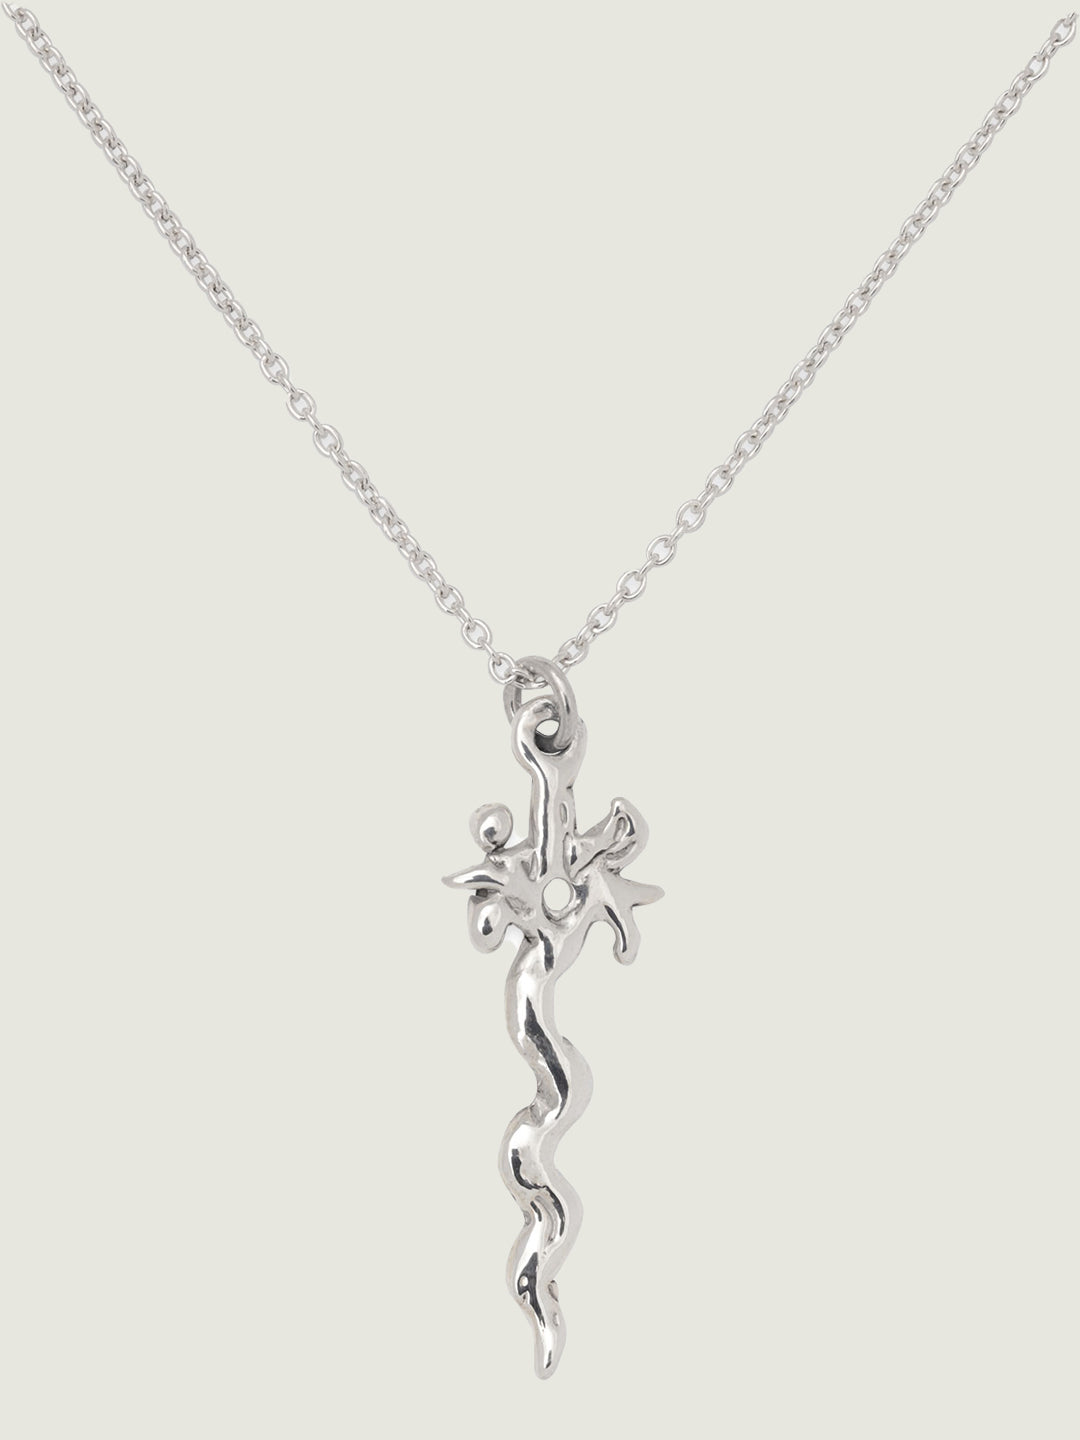 ‘Soft Sword’ Silver Necklace